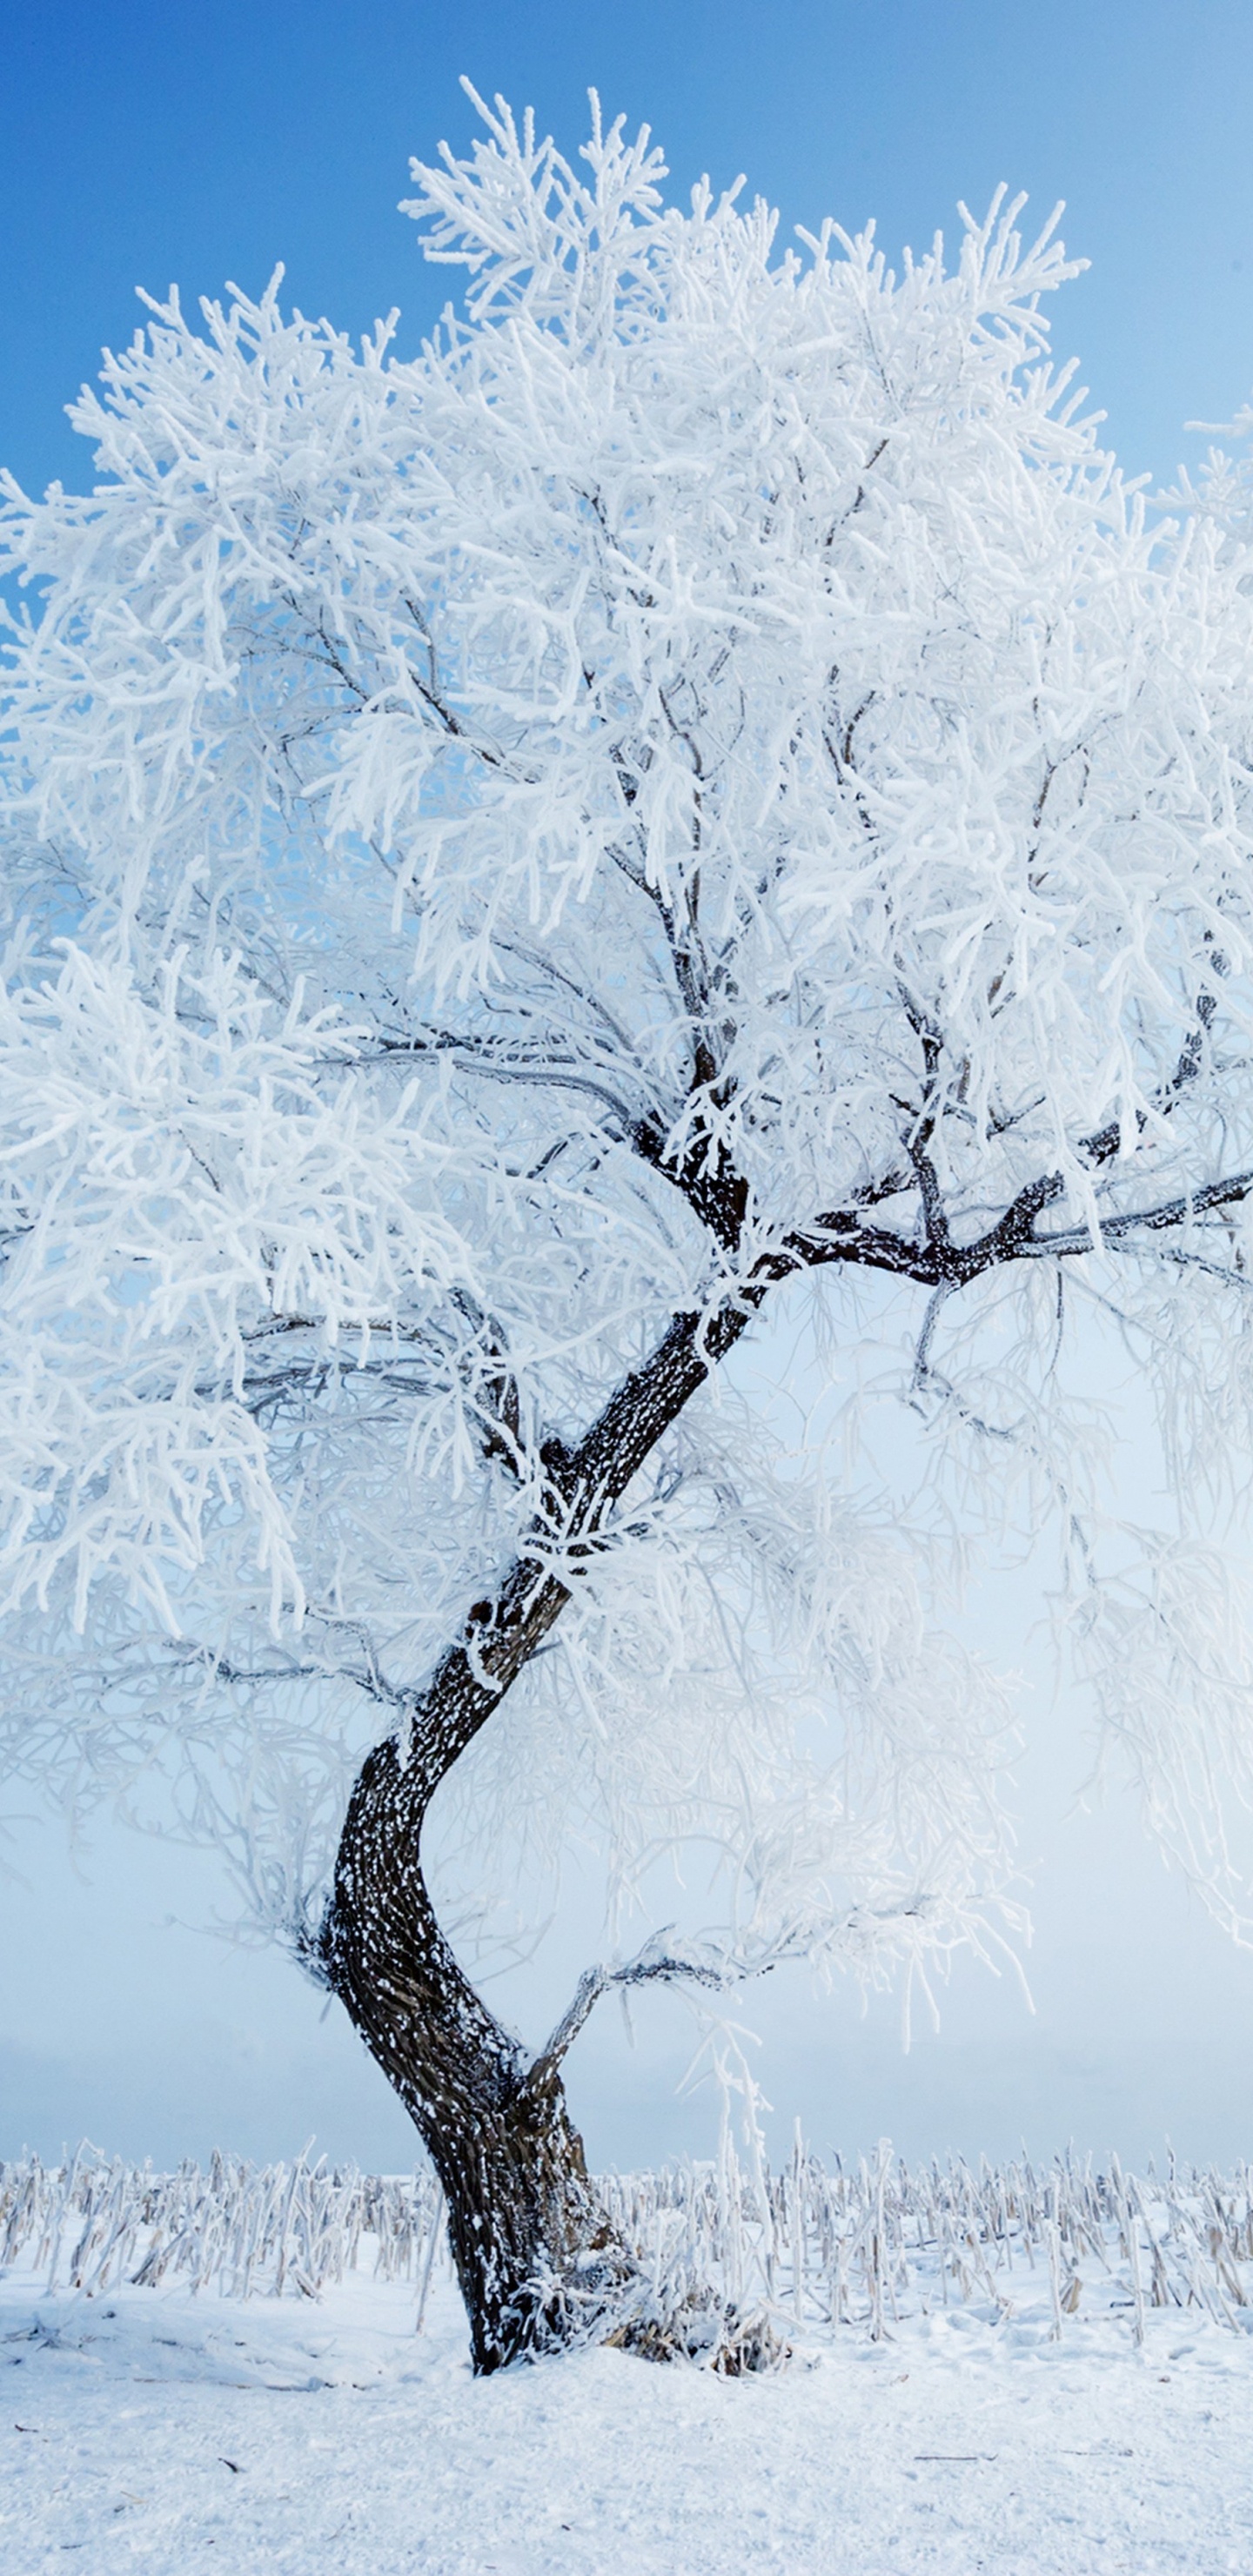 Snow Covered Bare Tree During Daytime. Wallpaper in 1440x2960 Resolution